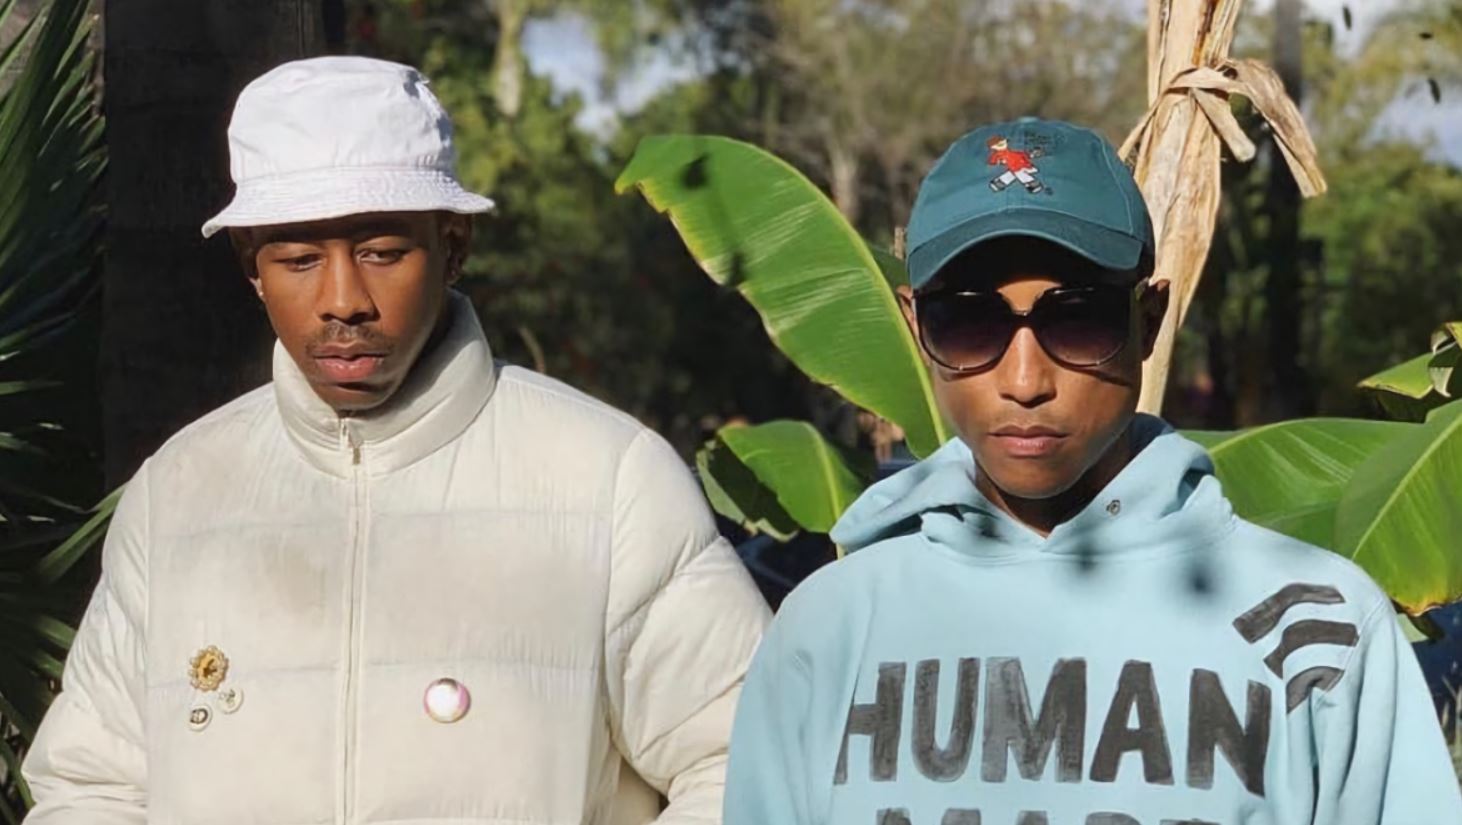 Pharrell, Tyler, the Creator & 21 Savage to Collab on New Song